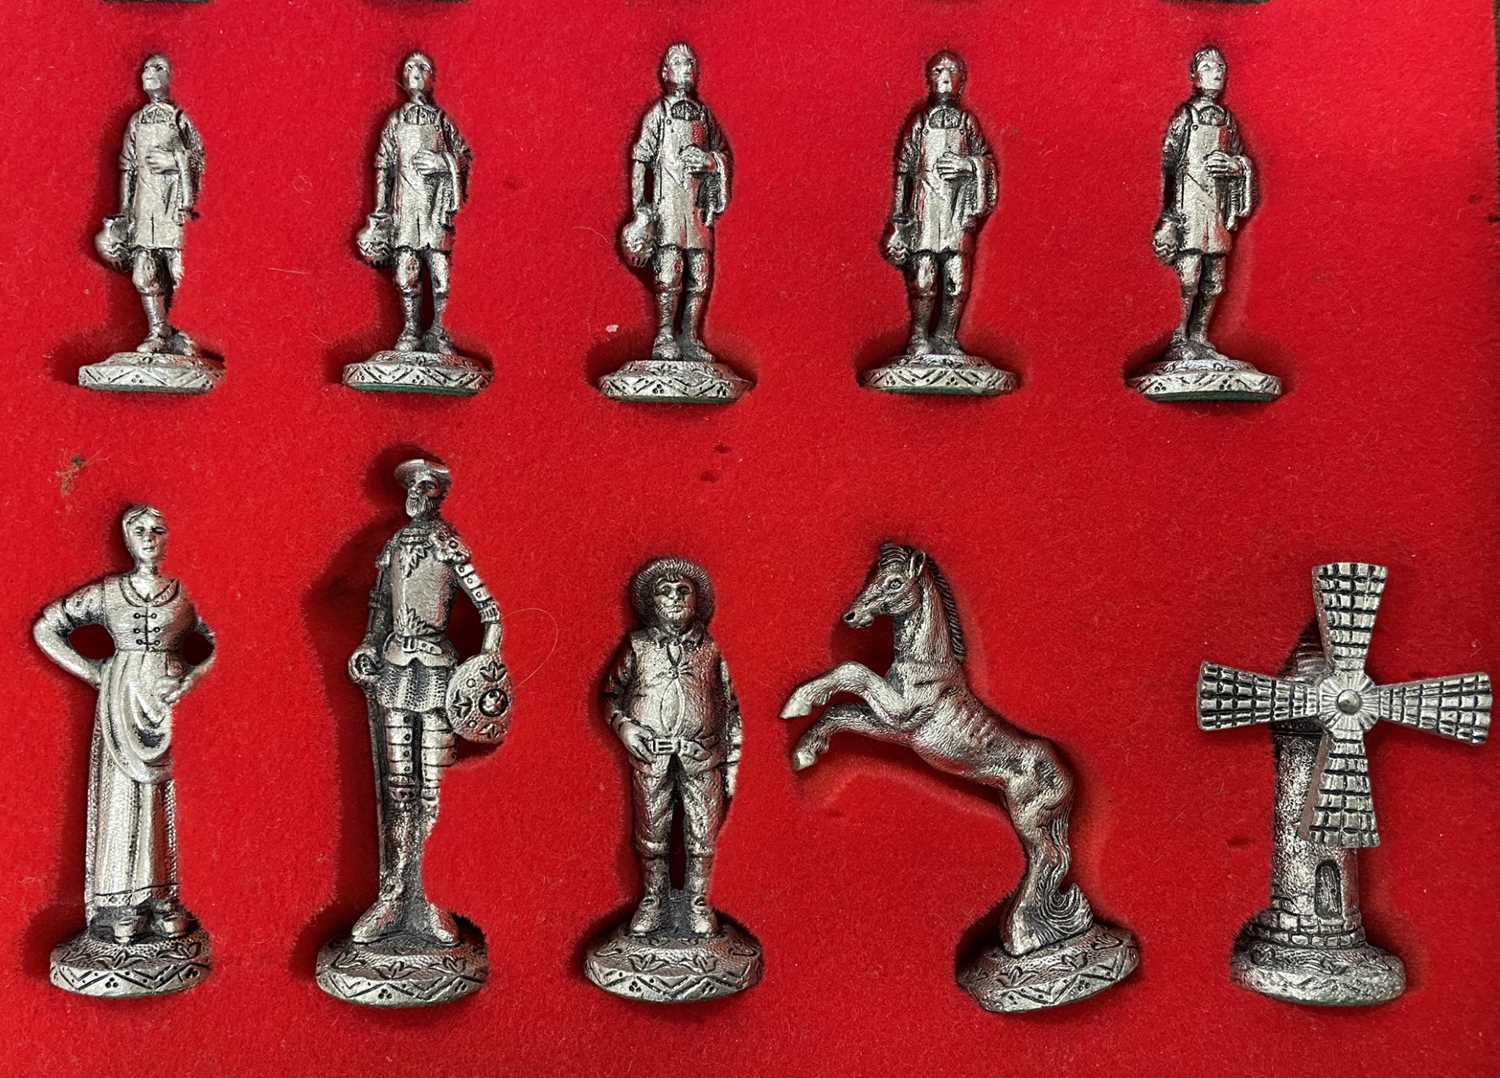 A metal chess set, formed as characters from Don Quixote. Rooks are windmills with rotating blades. - Image 2 of 5